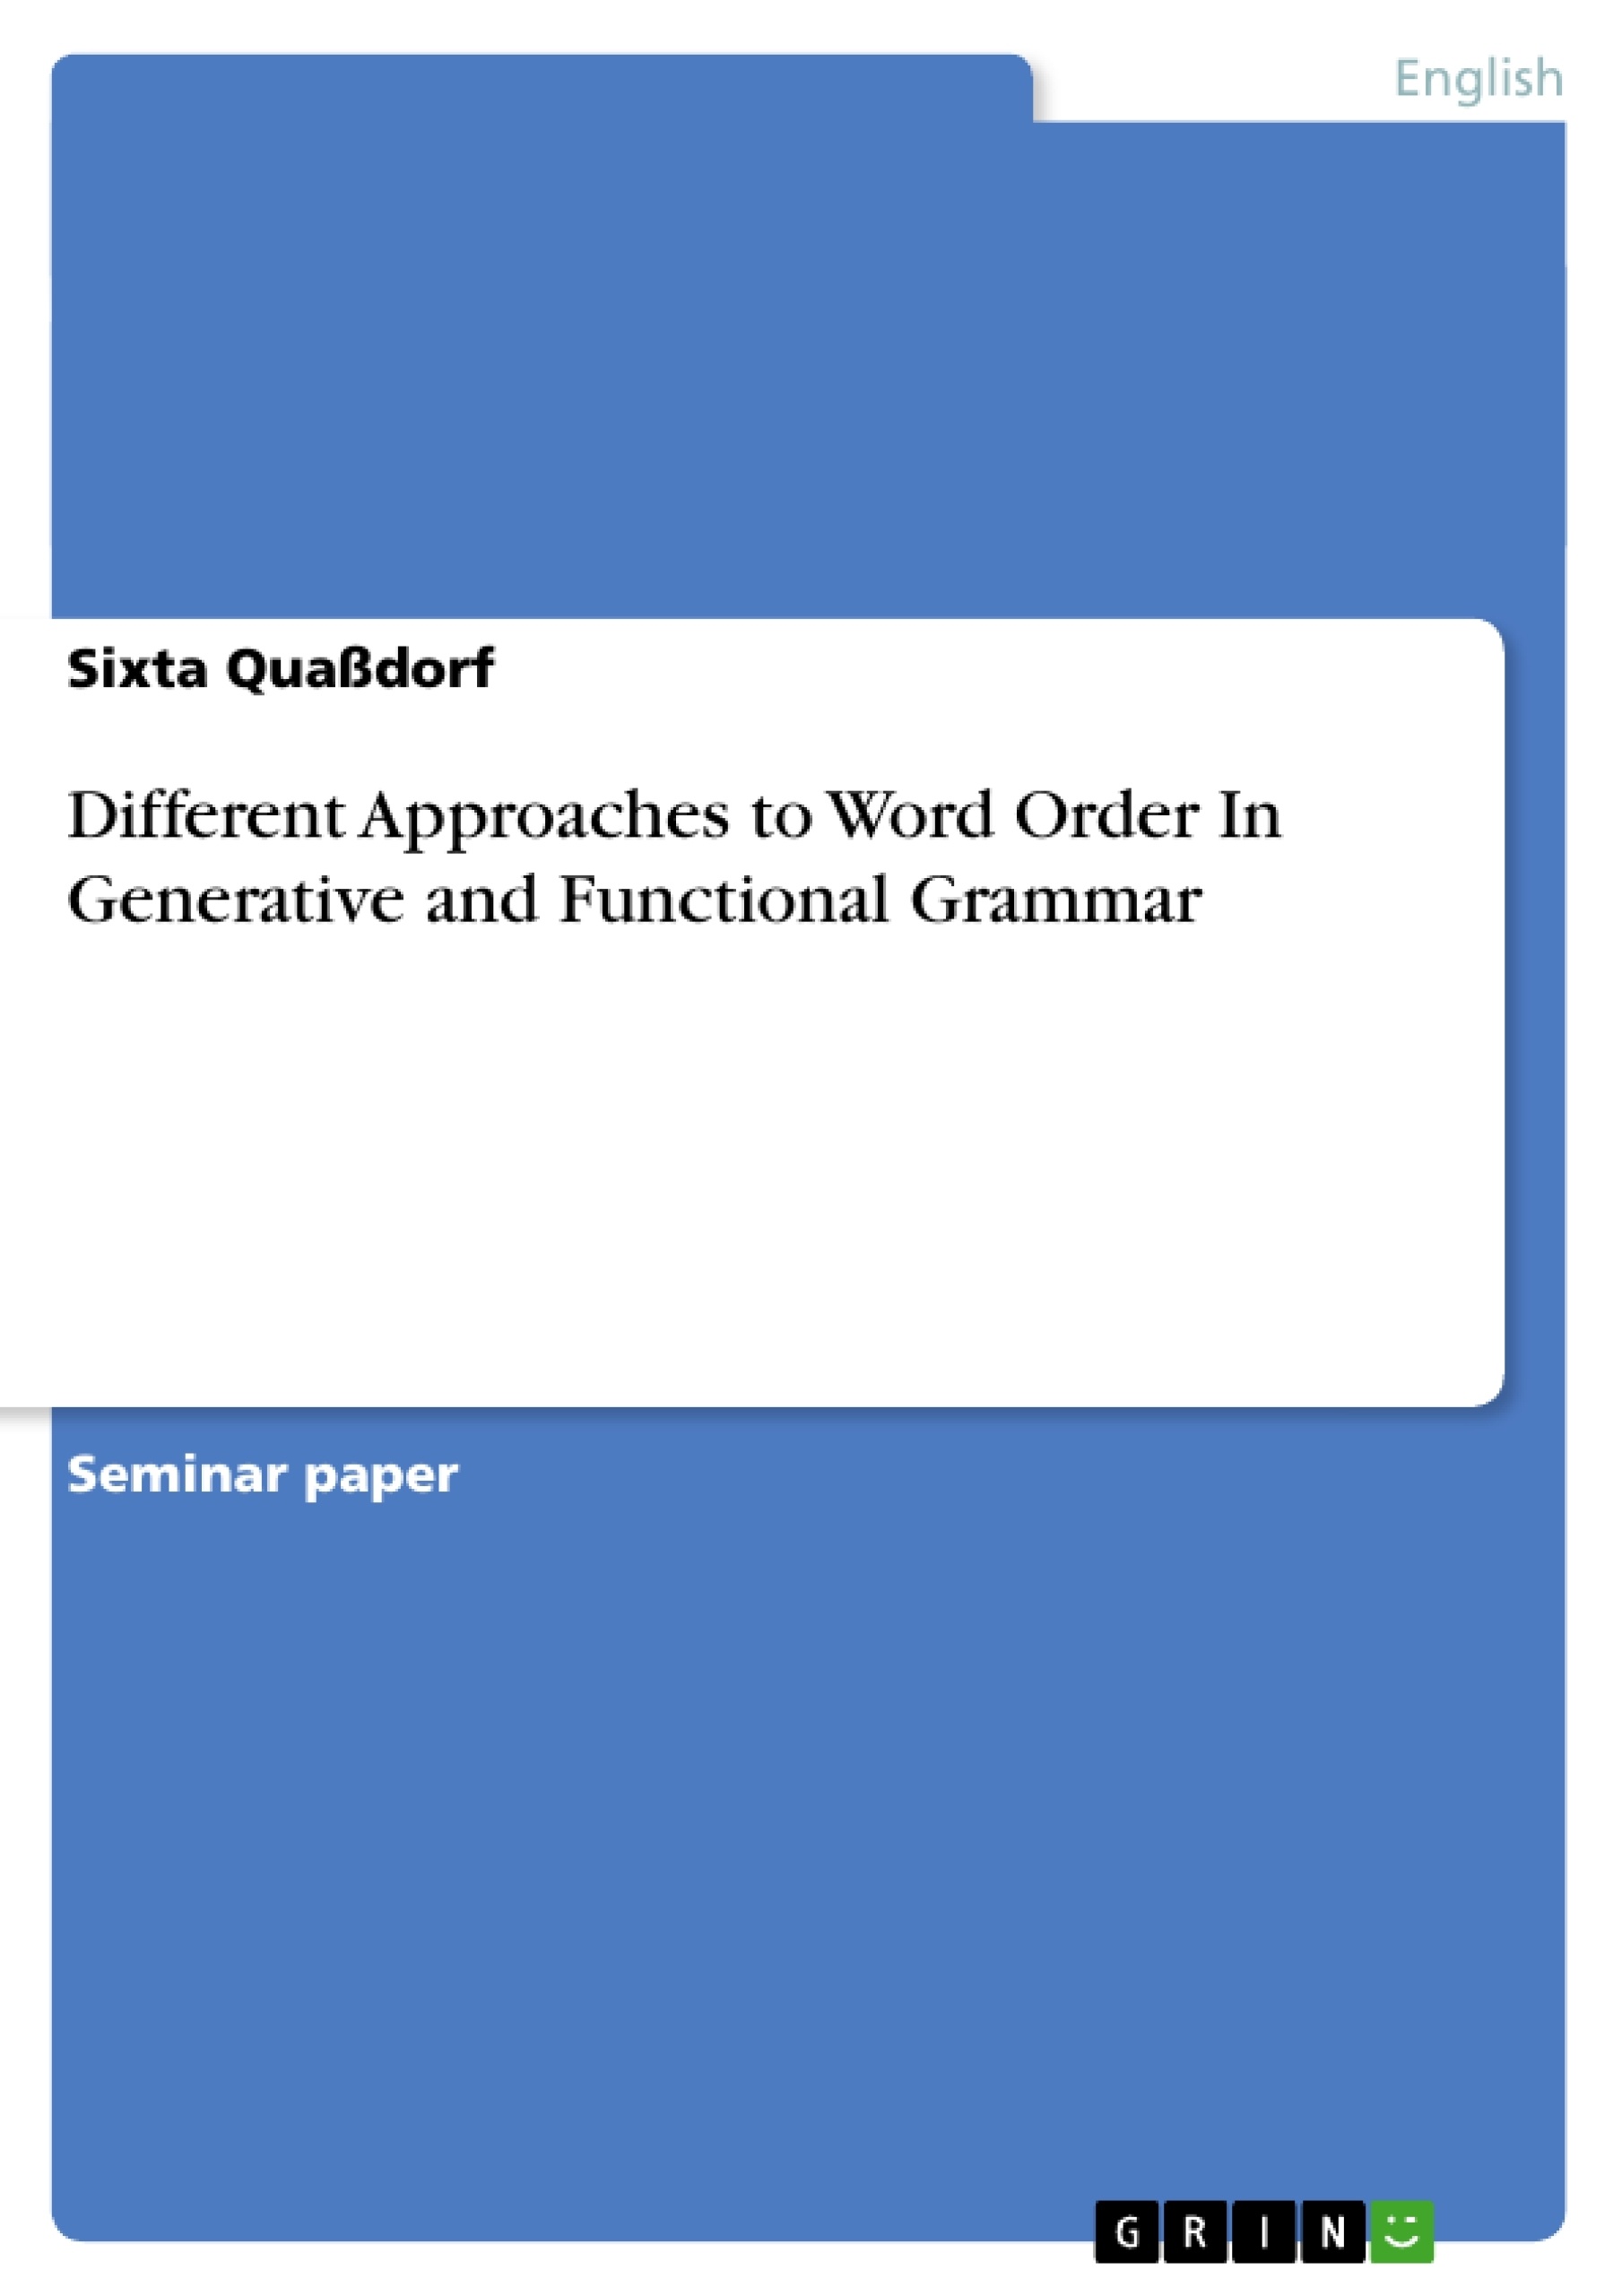 Título: Different Approaches to Word Order In Generative and Functional Grammar